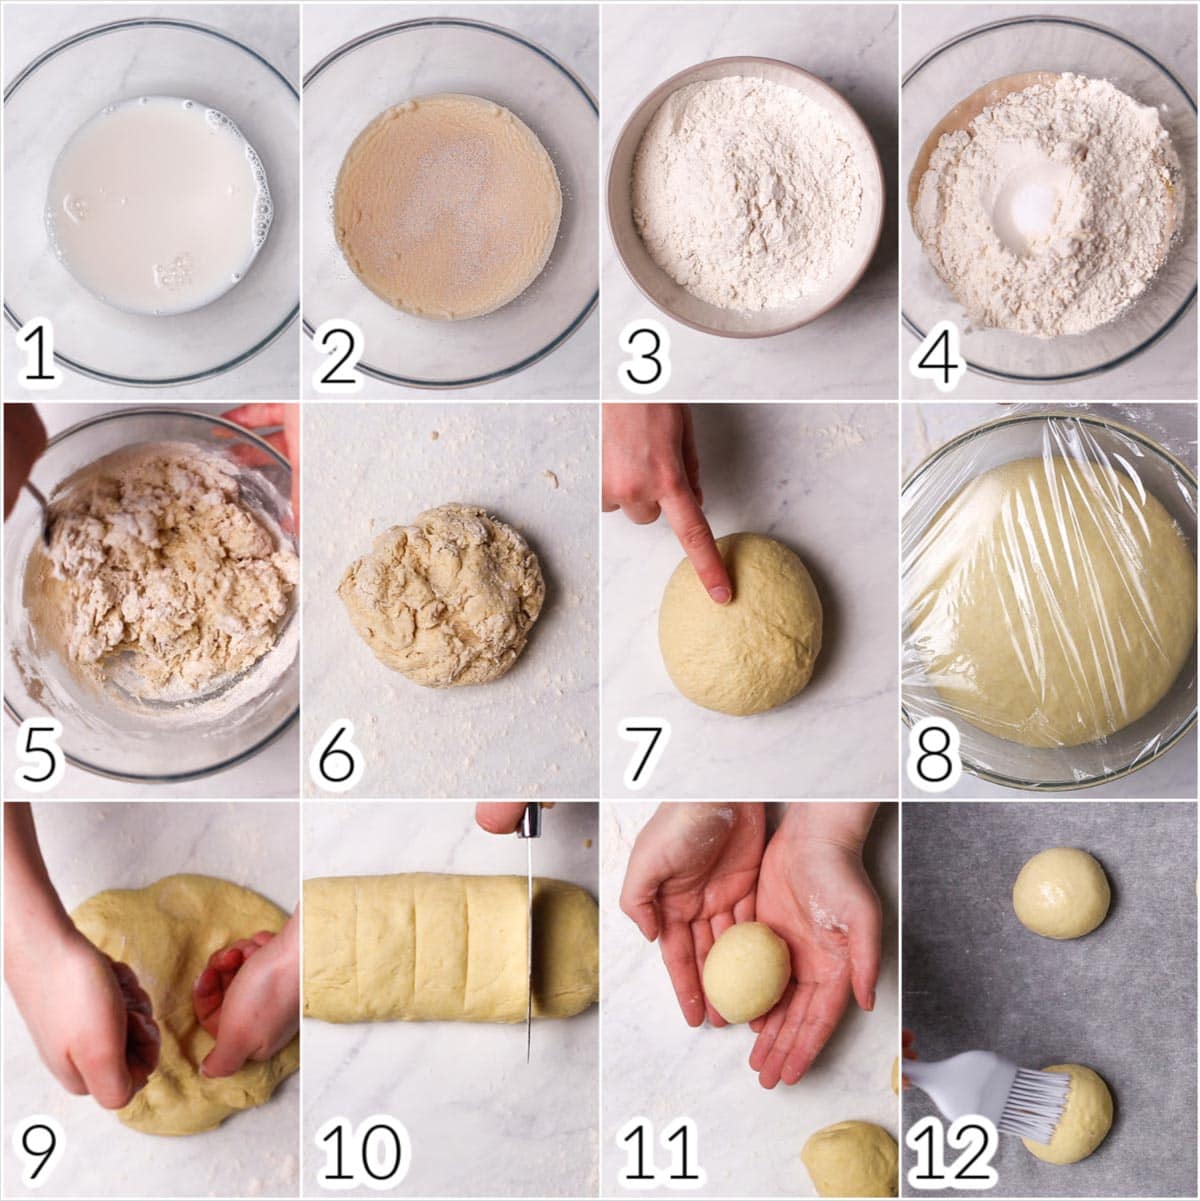 A collage of 12 images showing 12 steps in making a burger bun.